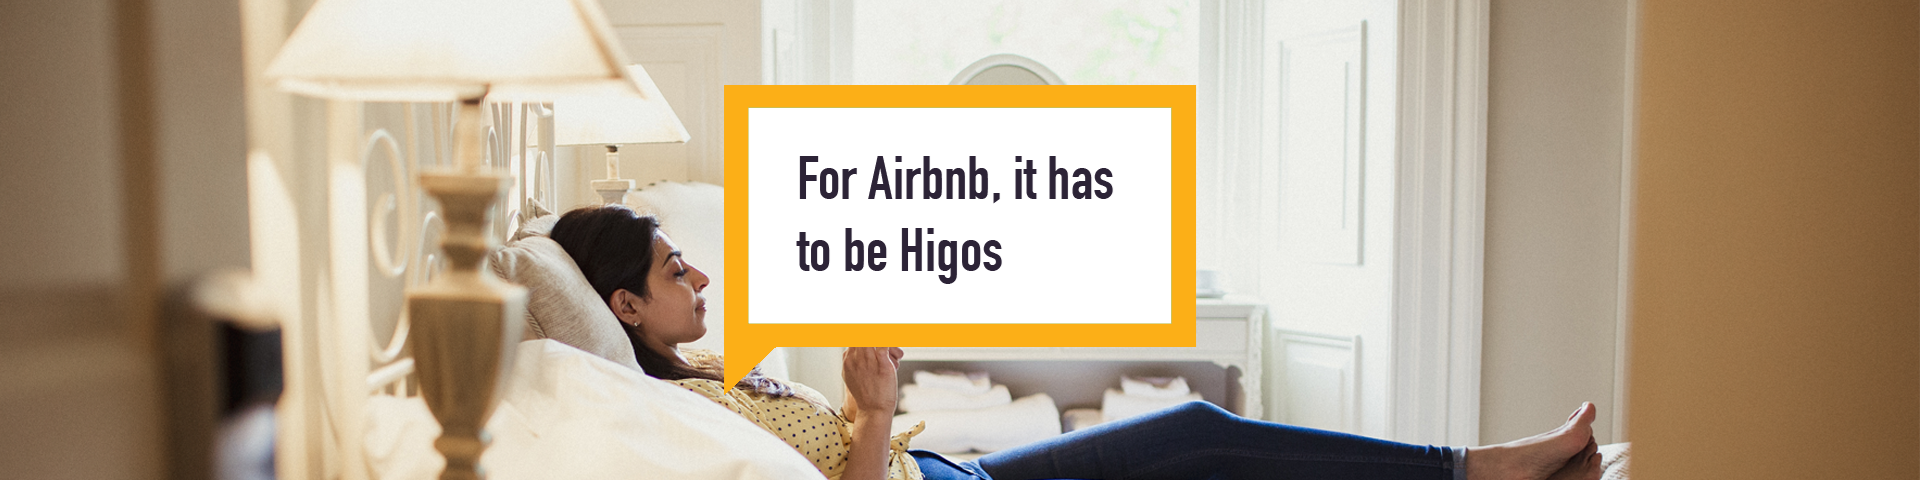 Higos Personal Insurance airbnb